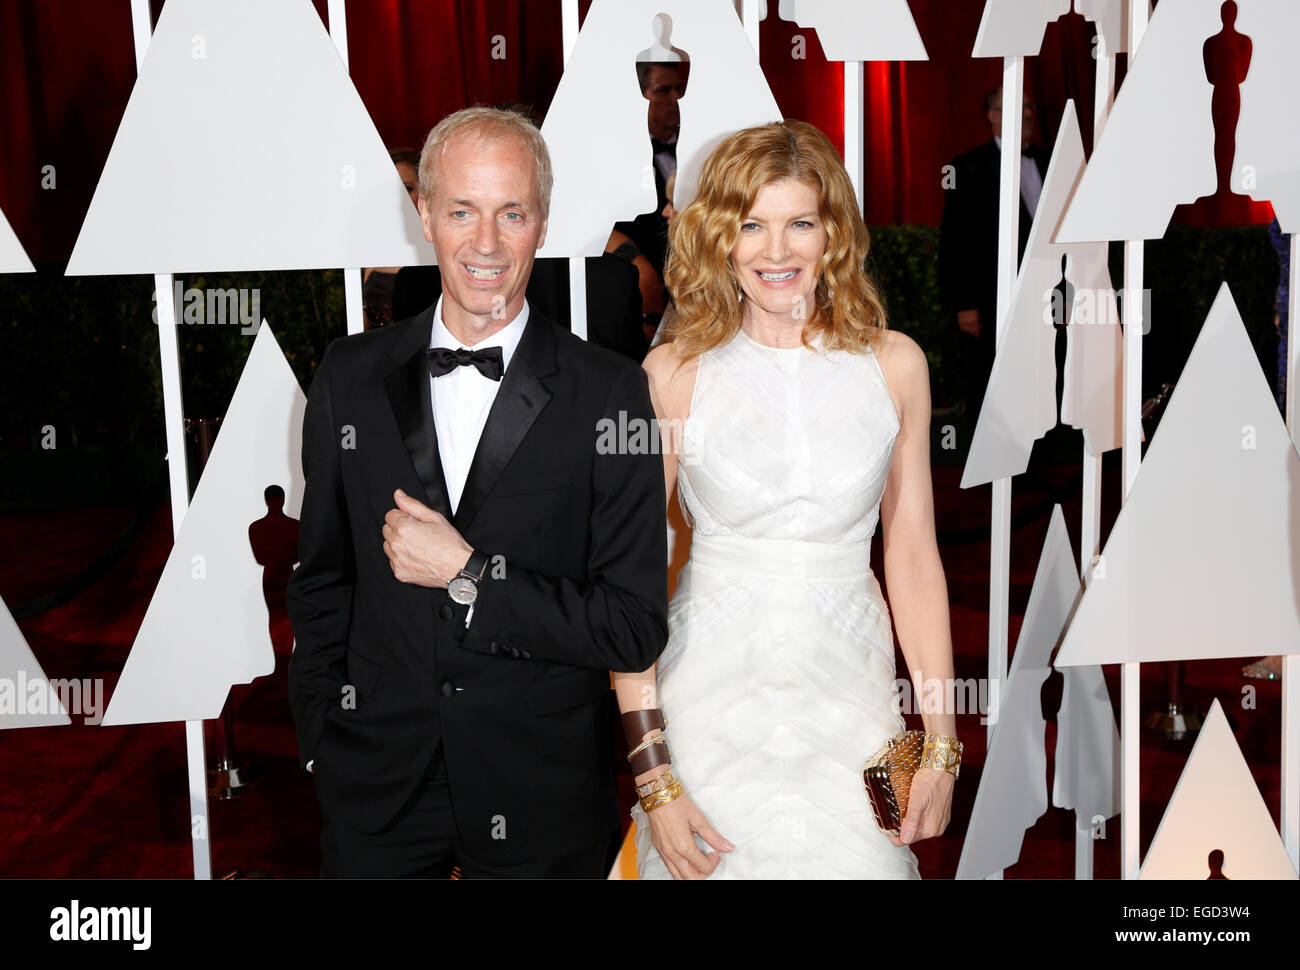 Actress Rene Russo and her husband Dan Gilroy attend the 87th Academy Awards, Oscars, at Dolby Theatre in Los Angeles, USA, on 22 February 2015. Photo: Hubert Boesl. Photo: Hubert Boesl/dpa - NO WIRE SERVICE - © dpa picture alliance/Alamy Live News Credit:  dpa picture alliance/Alamy Live News Stock Photo